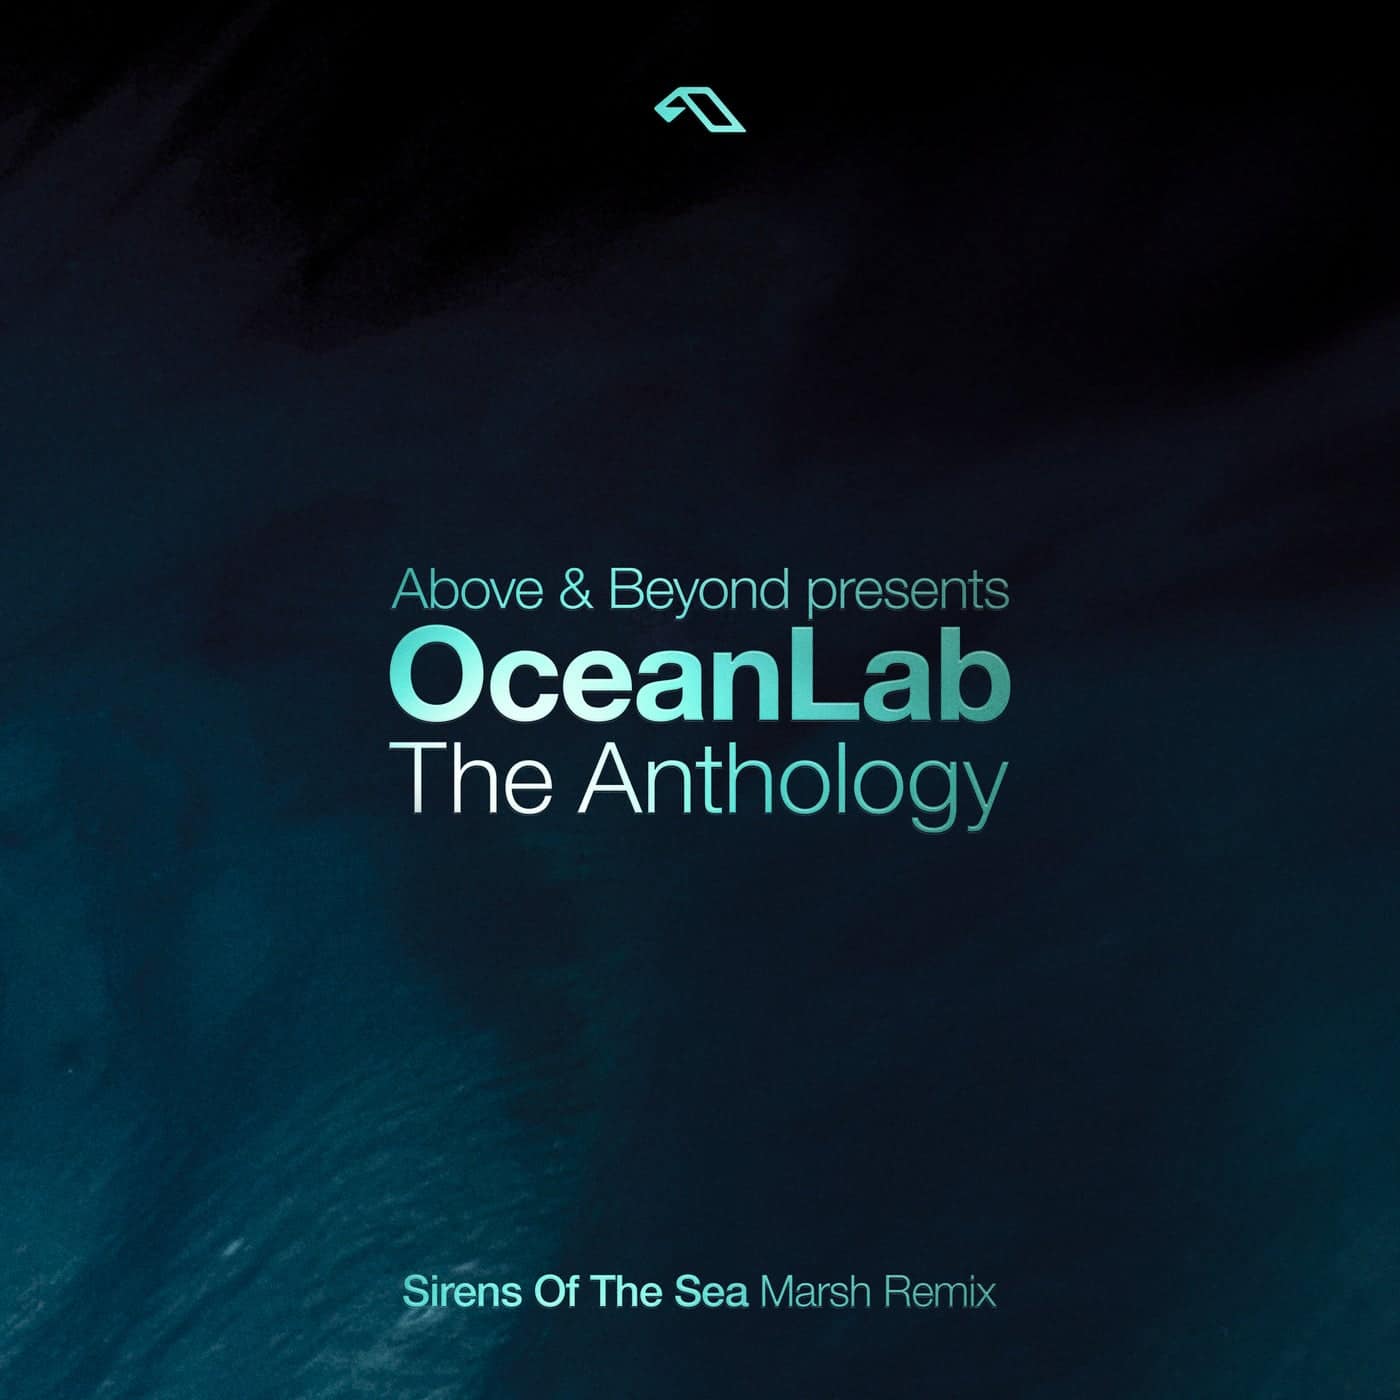 image cover: OceanLab, Above & Beyond - Sirens Of The Sea (Marsh Remix) on Anjunabeats